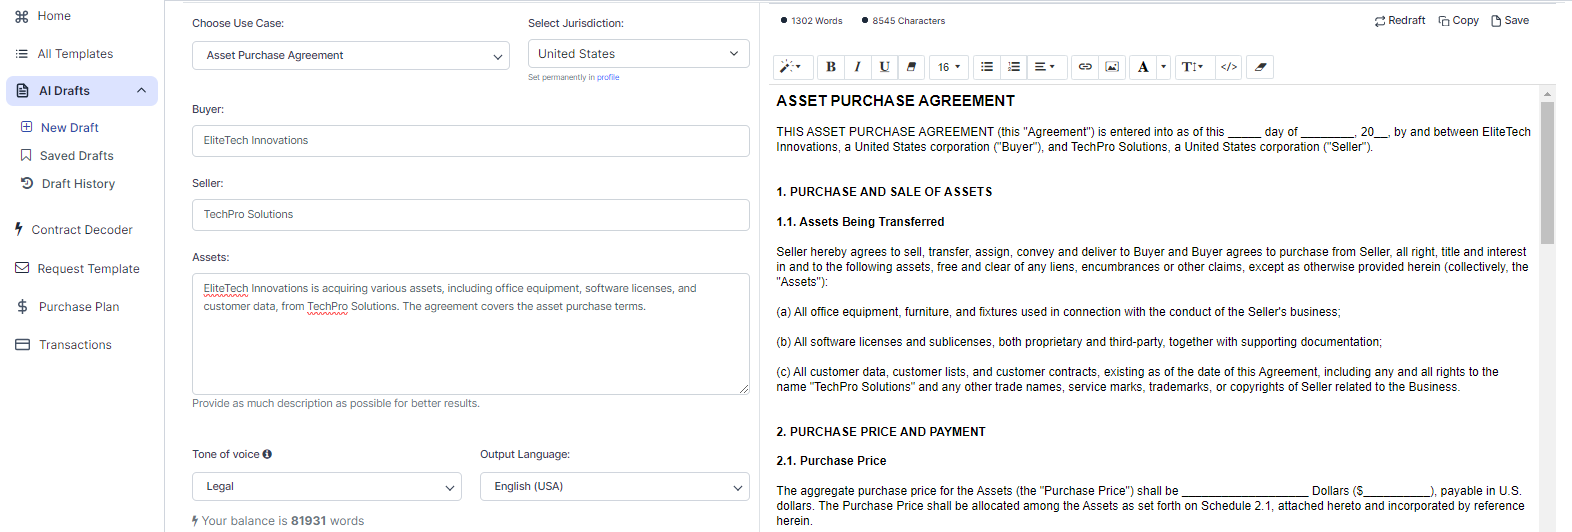 Asset Purchase Agreement template